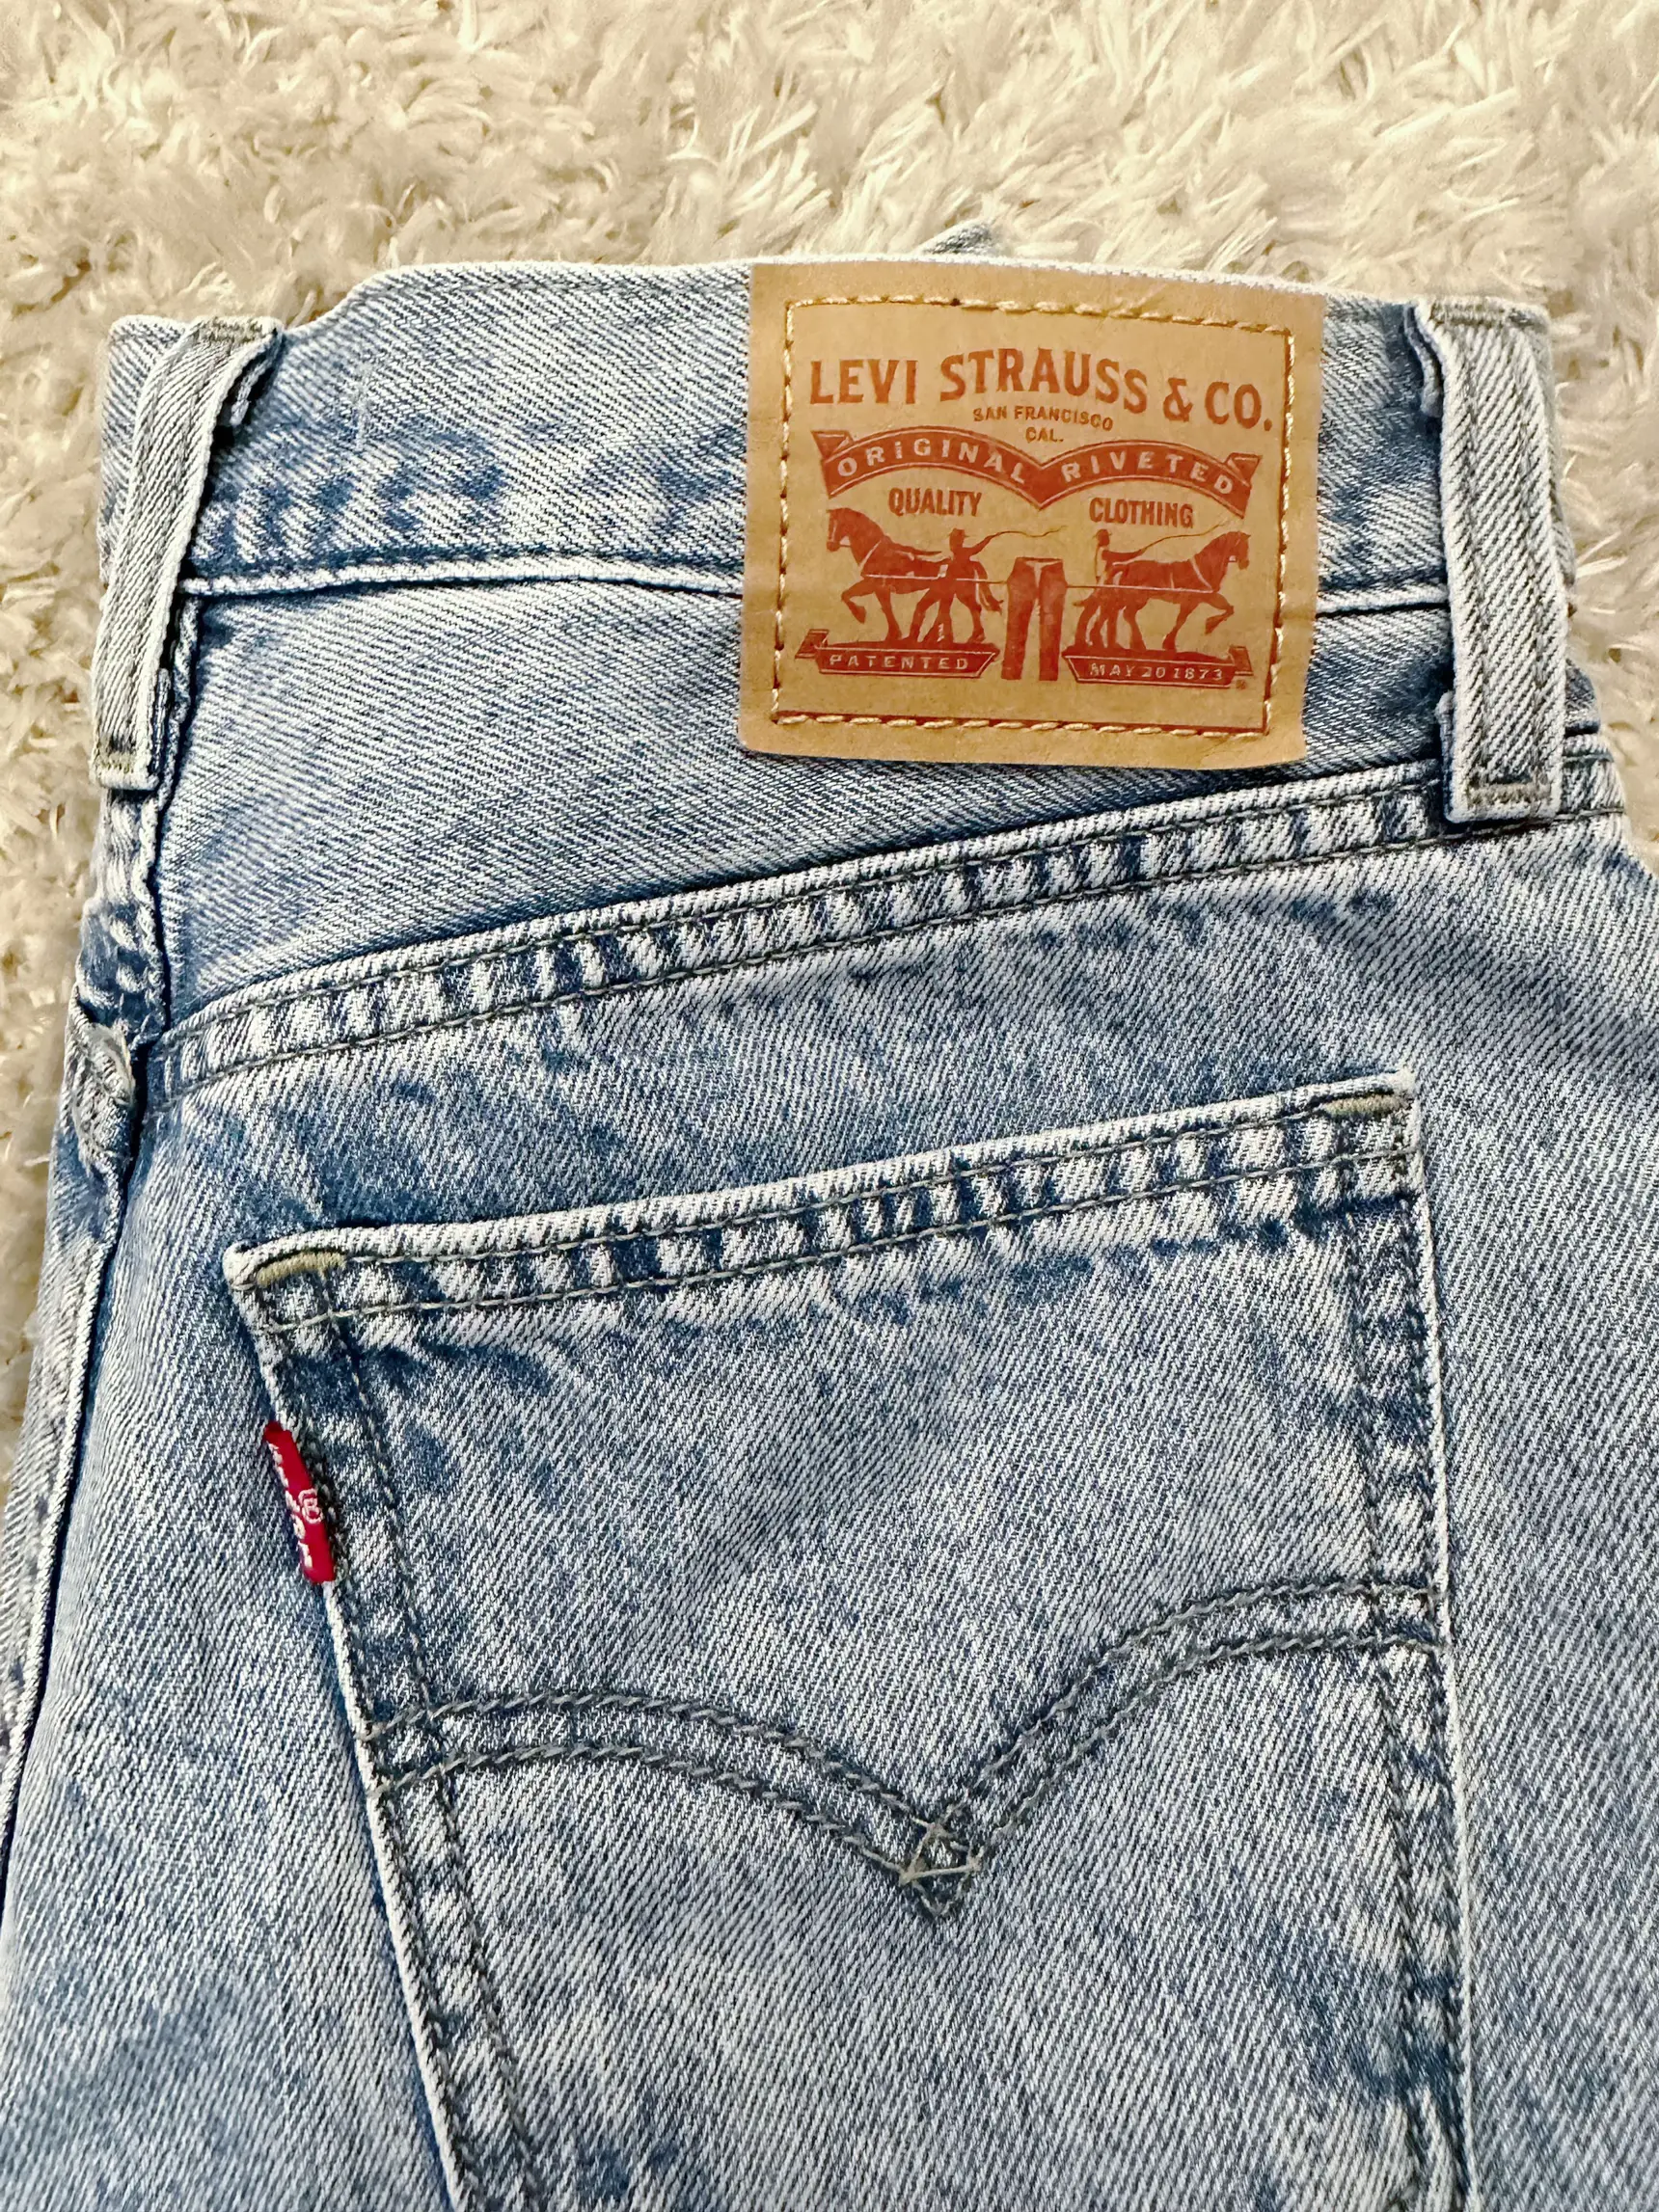 How to Care for Your Jeans: 5 Tips to Keep Looking Great in Your Favorite  Pair - Levi Strauss & Co : Levi Strauss & Co